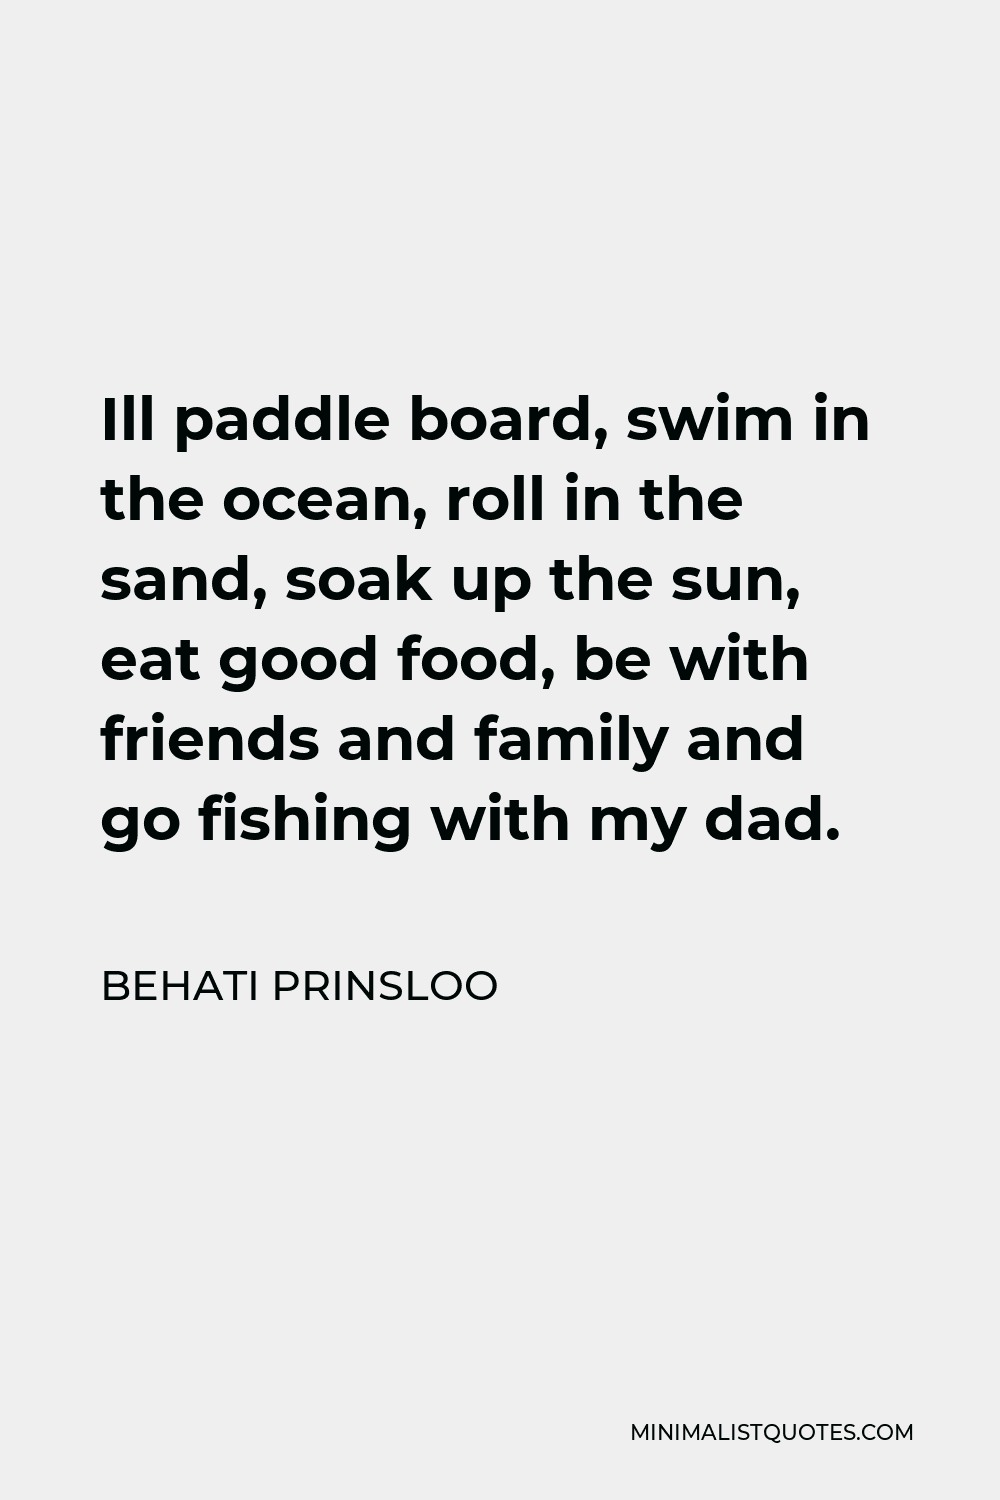 Behati Prinsloo Quote - Ill paddle board, swim in the ocean, roll in the sand, soak up the sun, eat good food, be with friends and family and go fishing with my dad.